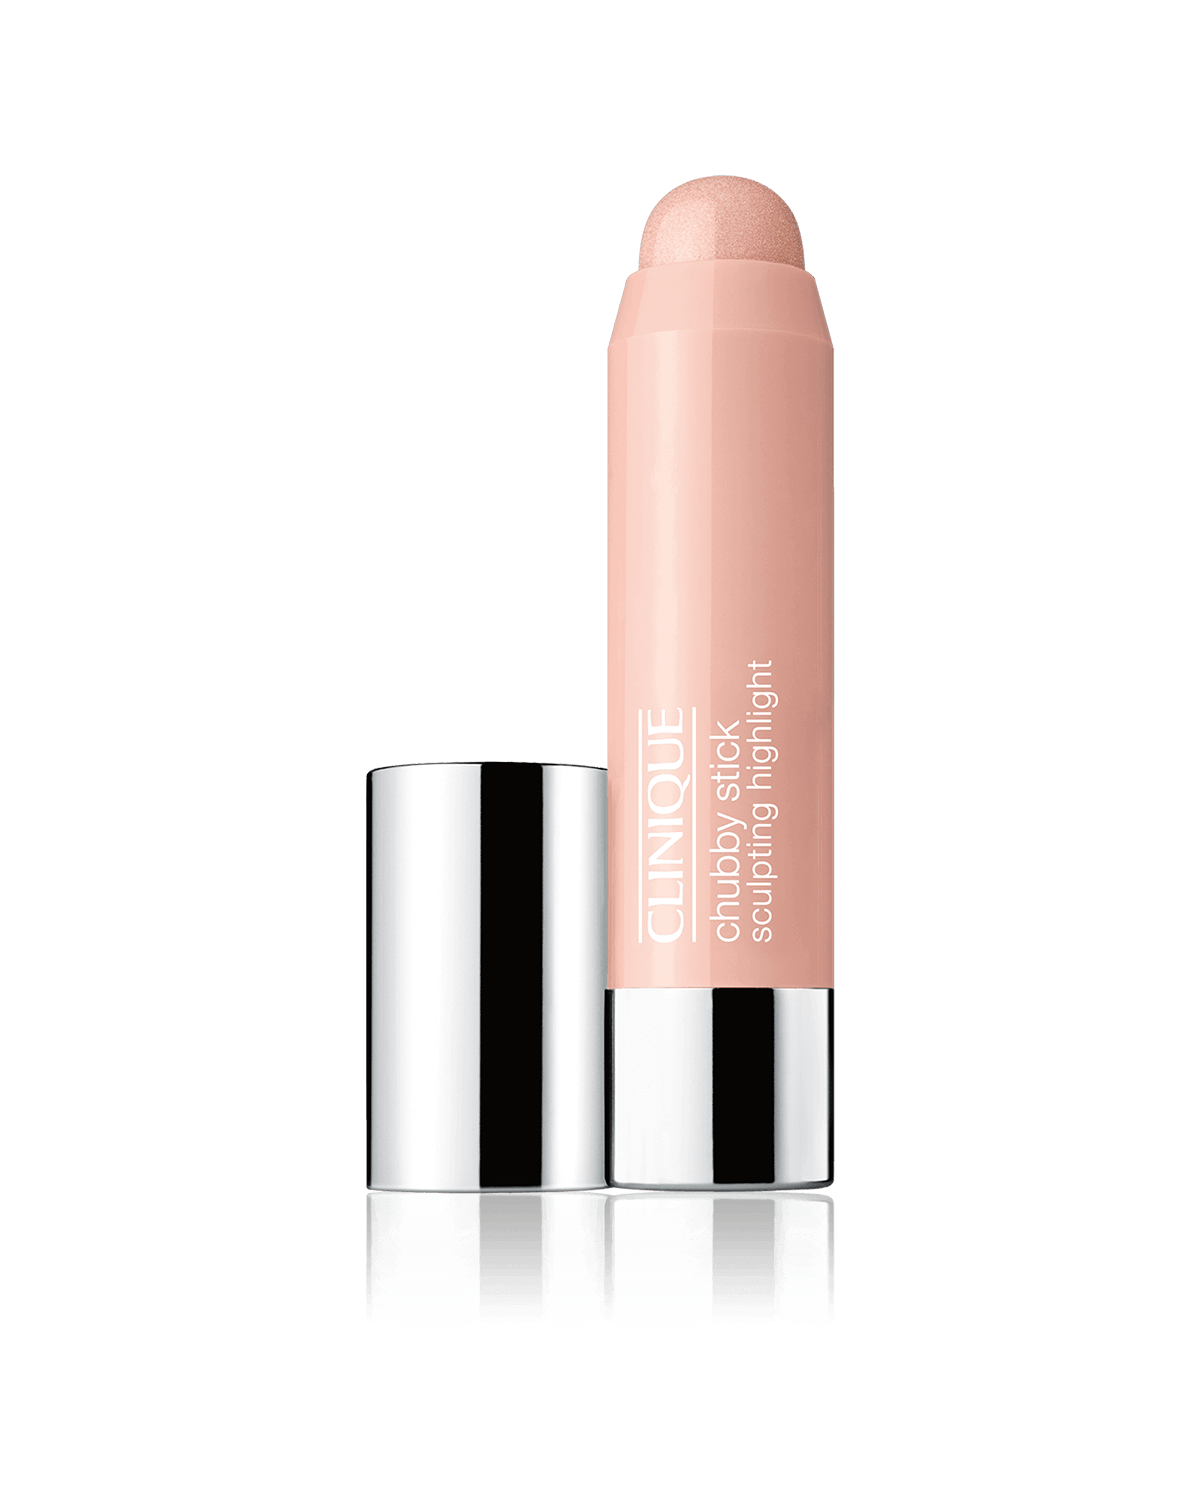 Clinique Chubby In The Nude Foundation Stick